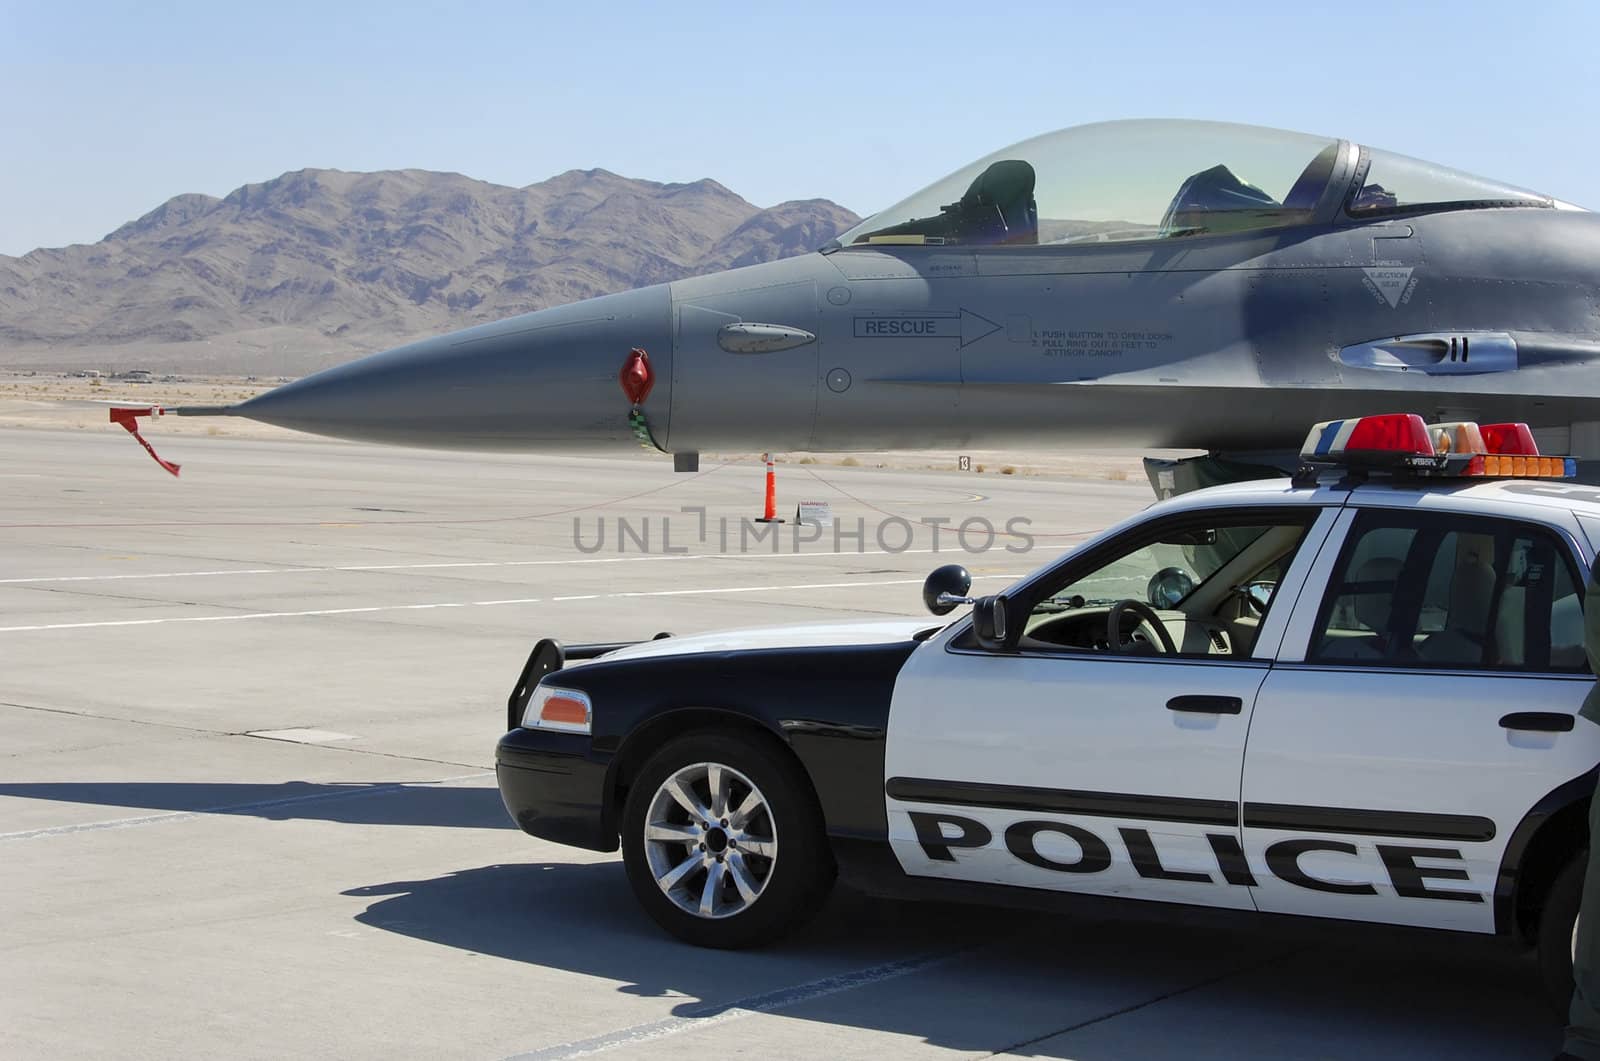 Air Force F-16 fighter aircraft ground display with police car